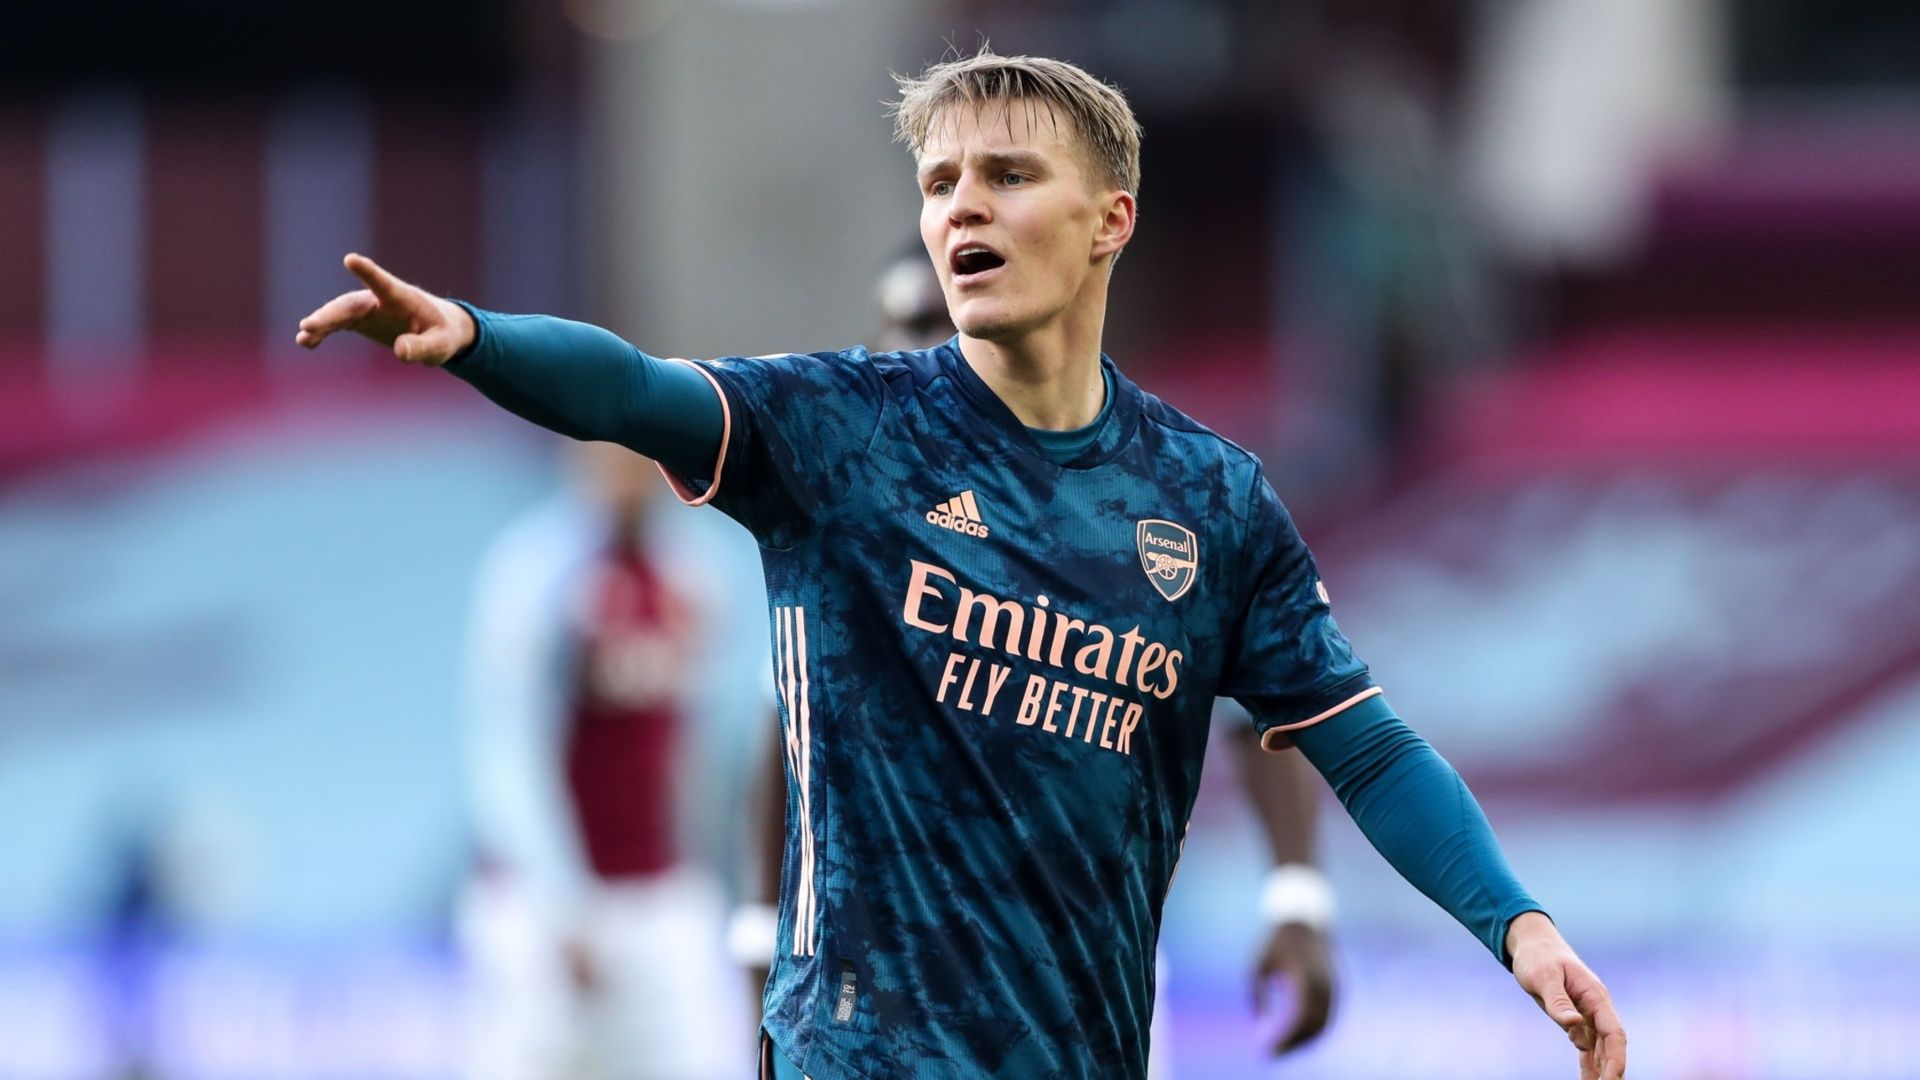 Ødegaard is beginning to feel the warmth at Arsenal